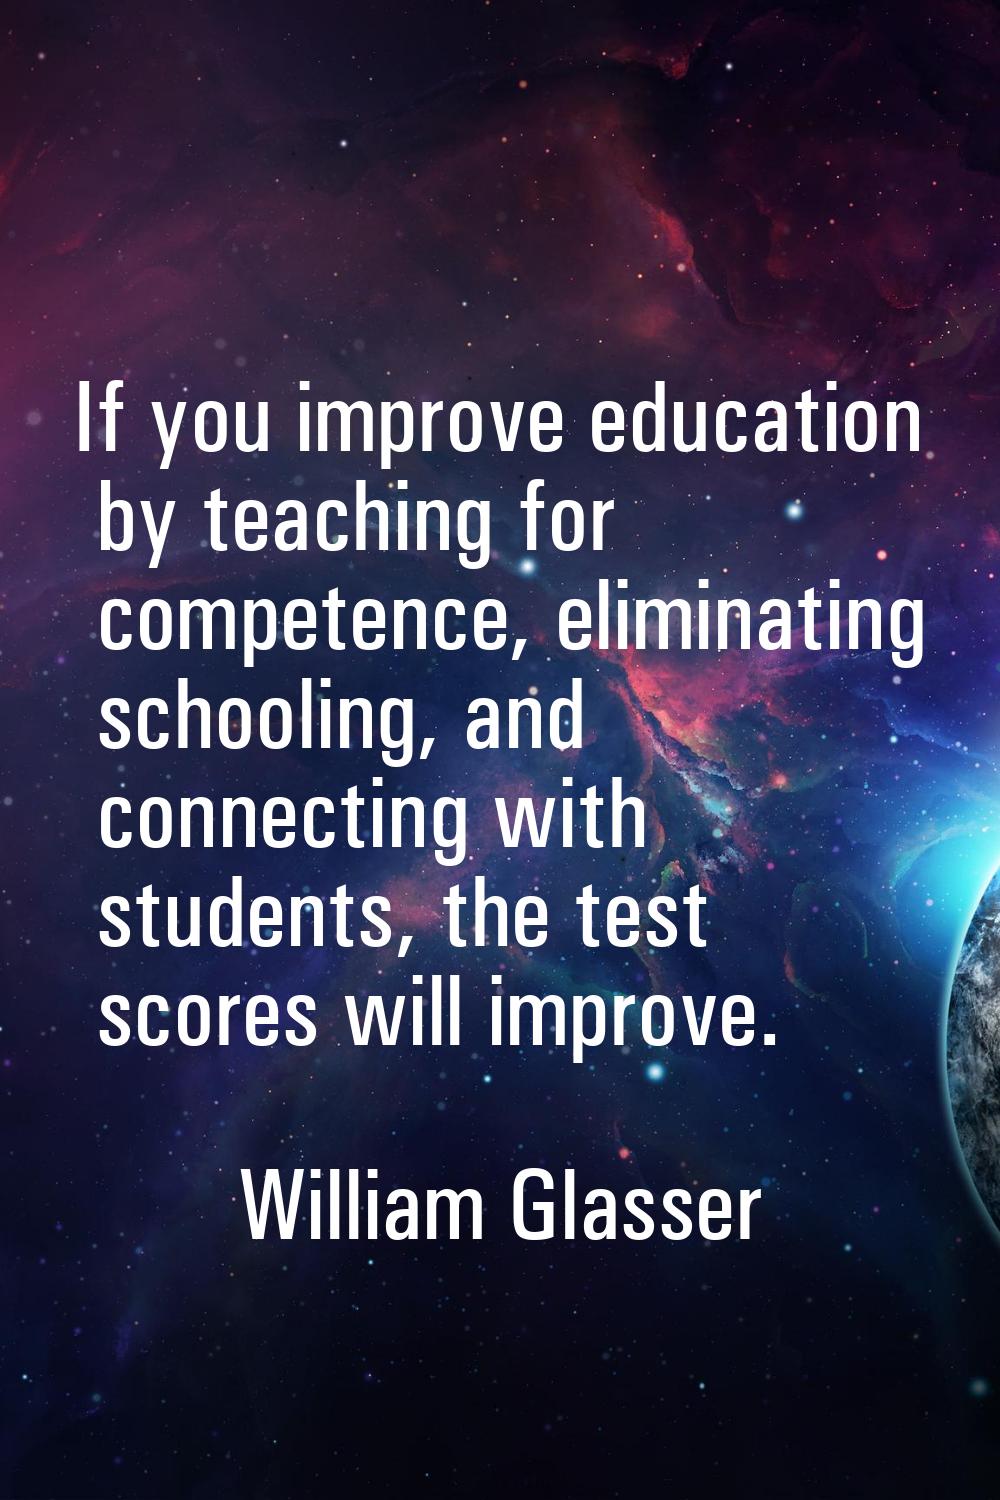 If you improve education by teaching for competence, eliminating schooling, and connecting with stu